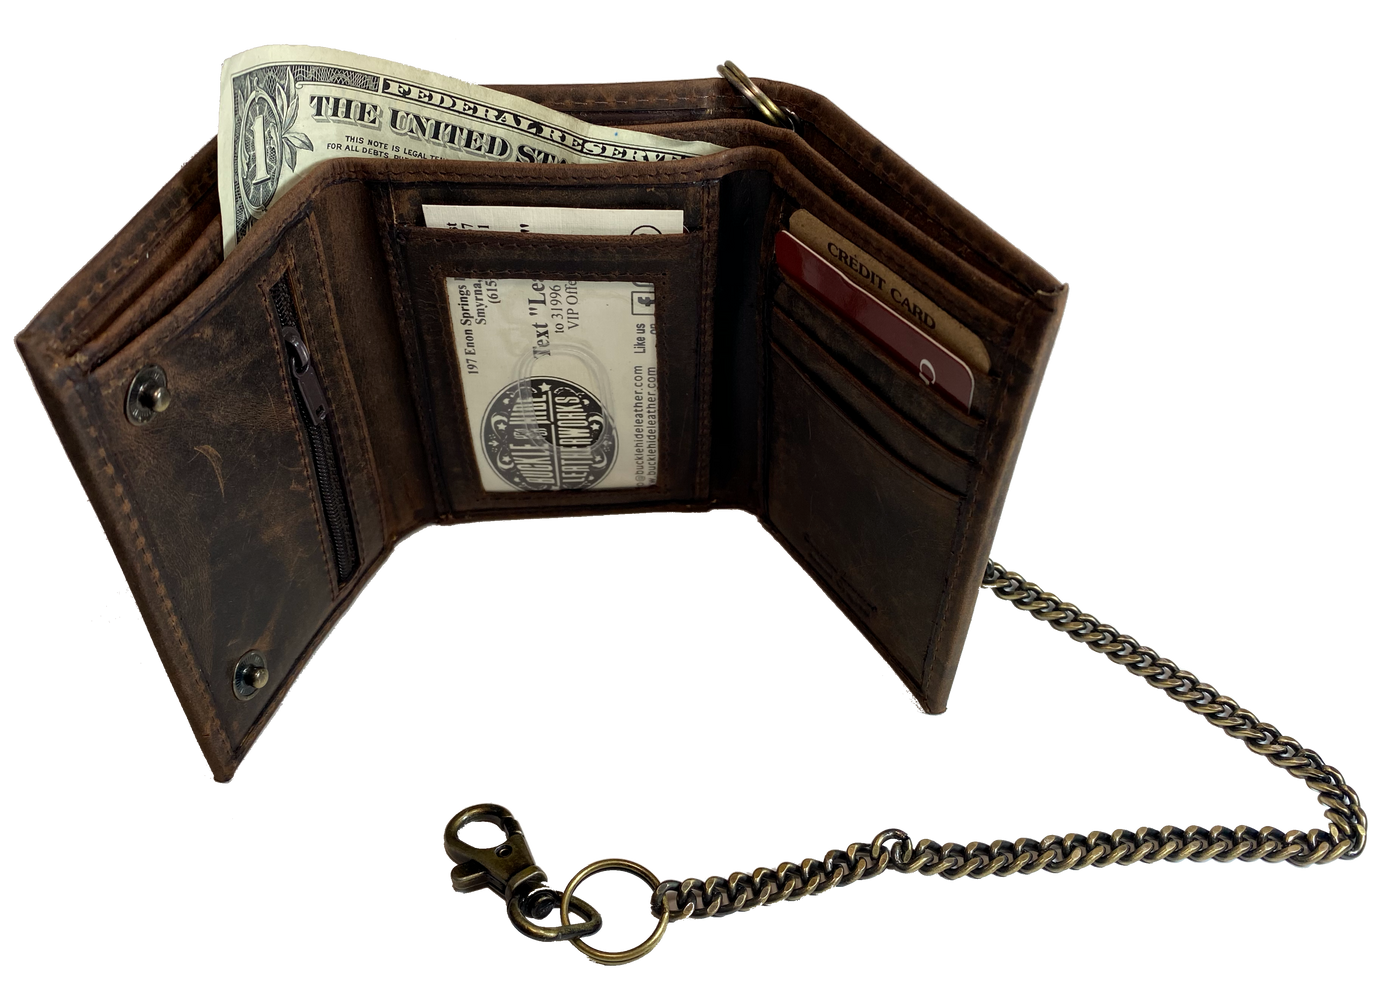 Popular Distressed brown Tri-fold Chain Wallet. 2 cash slots, 4 card slots, I.D. slot, zippered pocket for all your stash. Will darken with a nice patina with use. It's imported but it's Buckle and Hide approved. standard tri-fold size. inside view